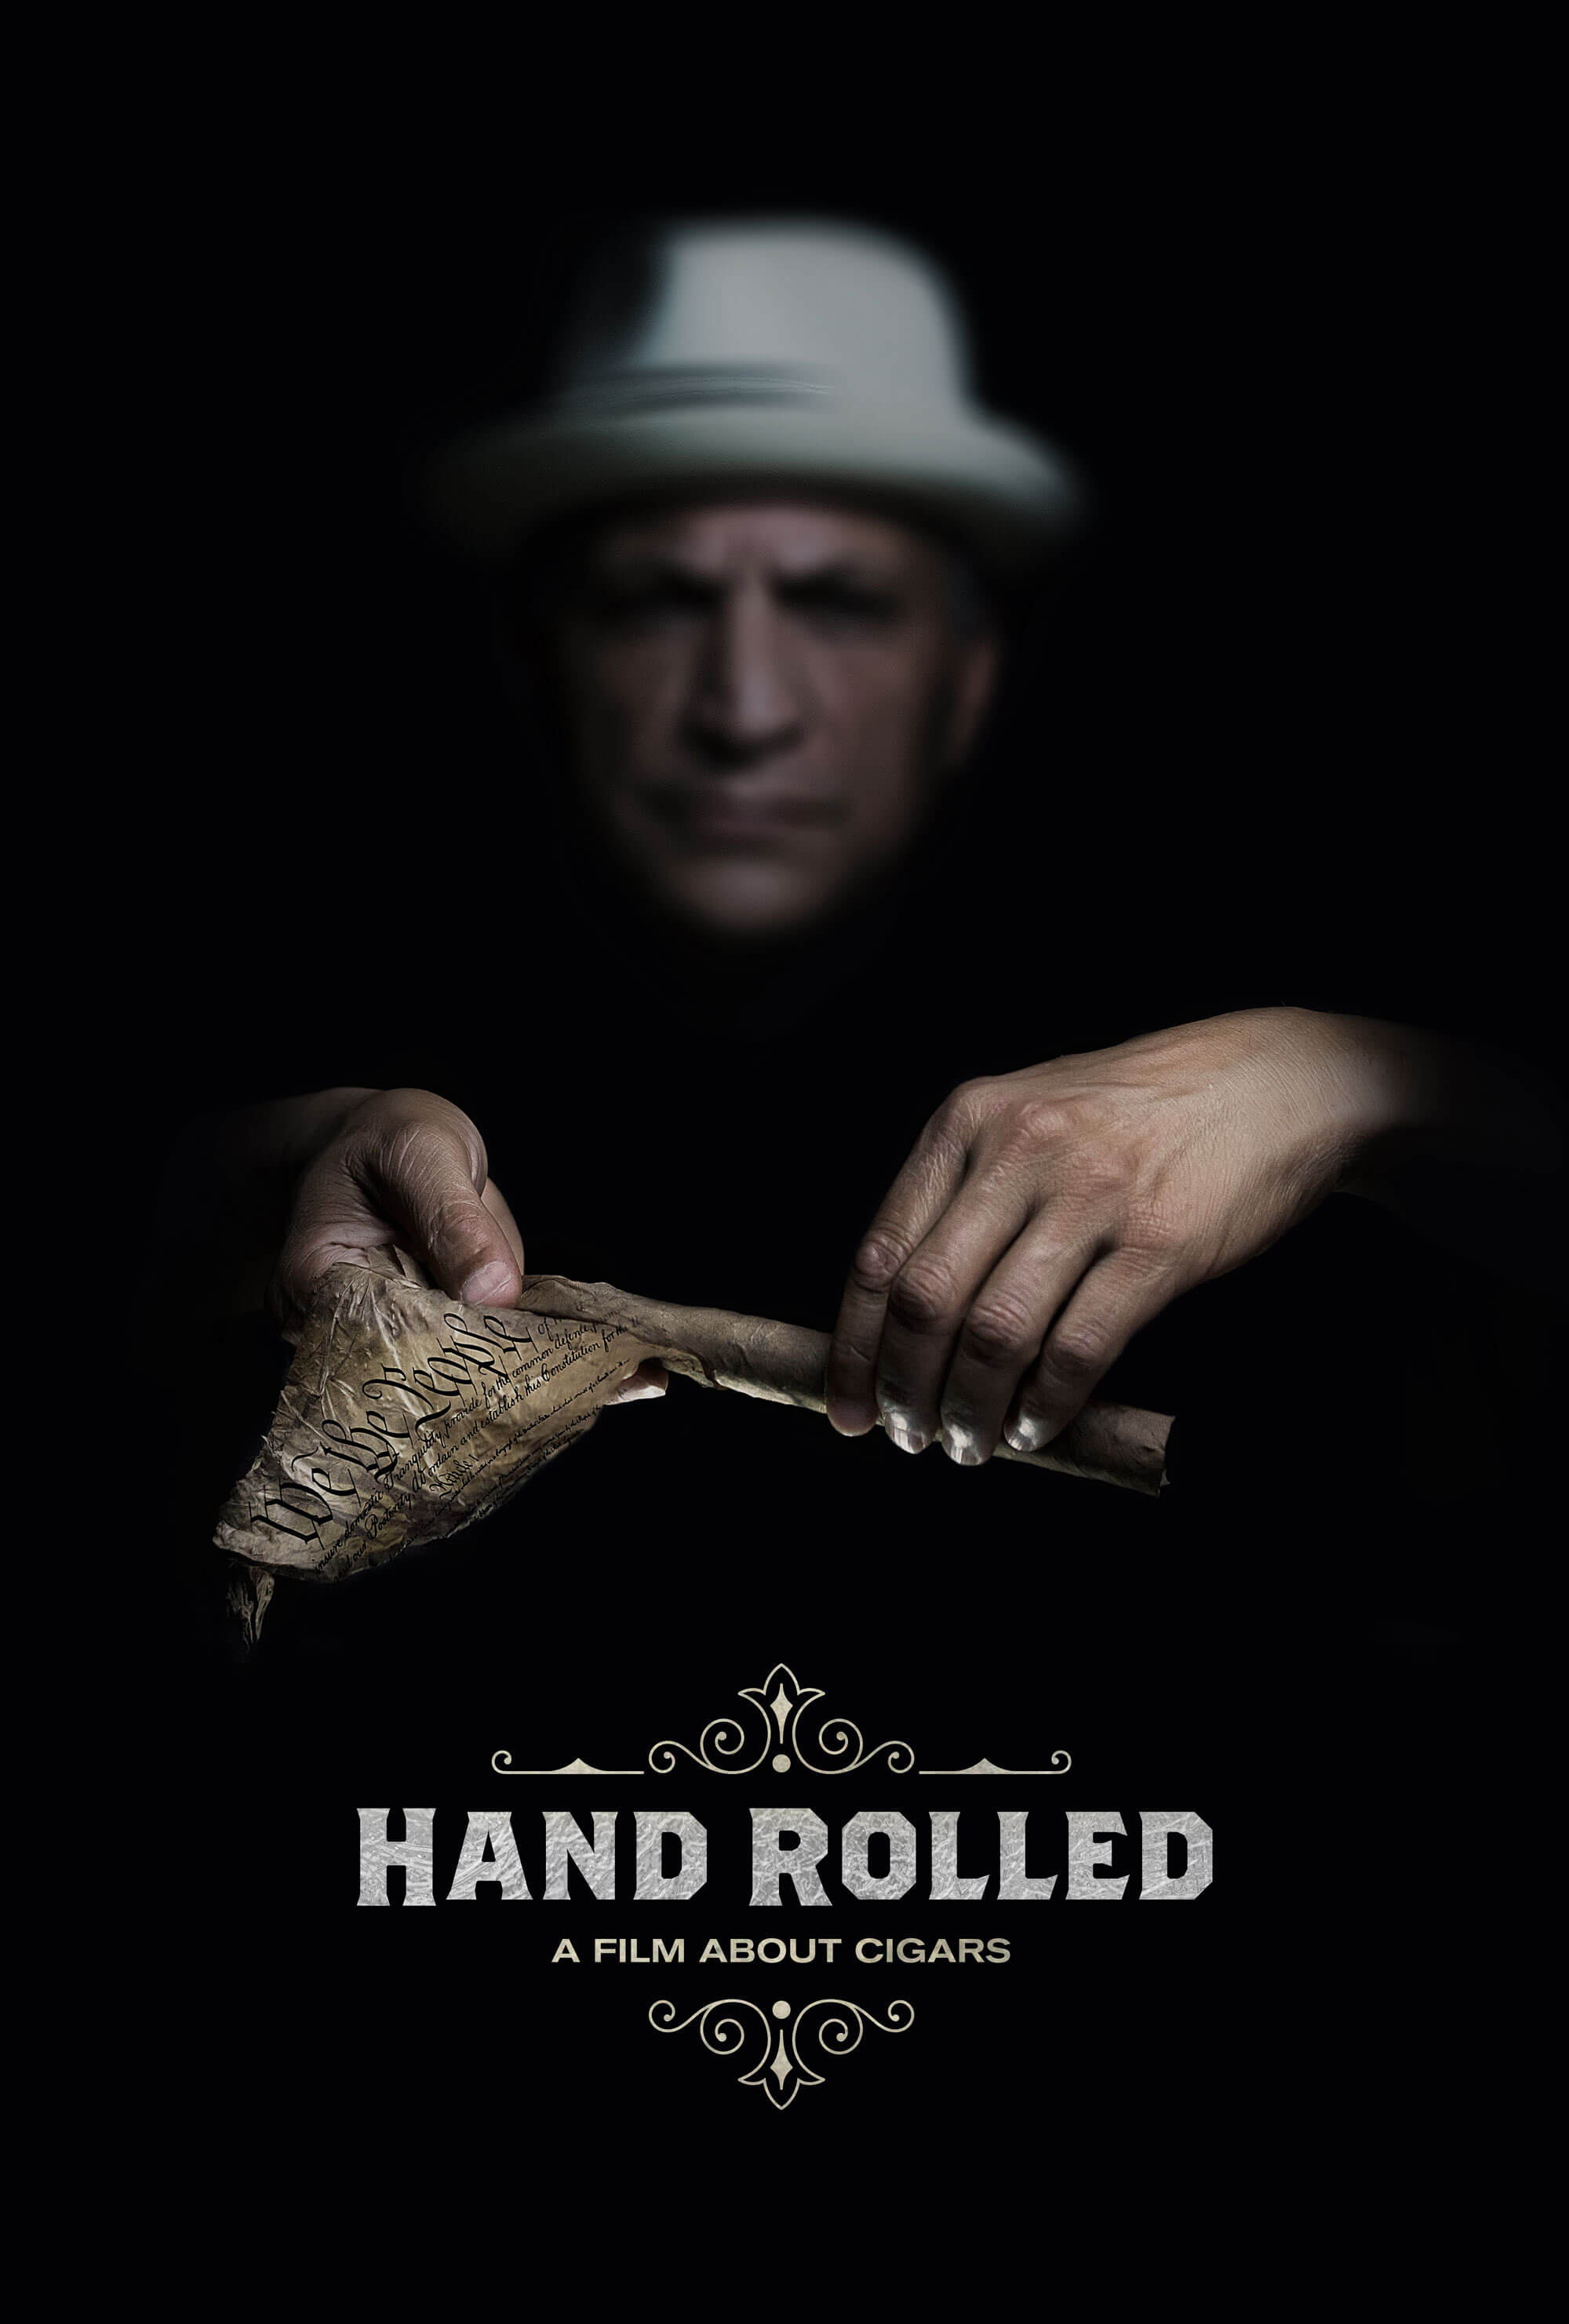 Hand Rolled: A Film About Cigars to Be Made Public for Free via YouTube - Cigar News